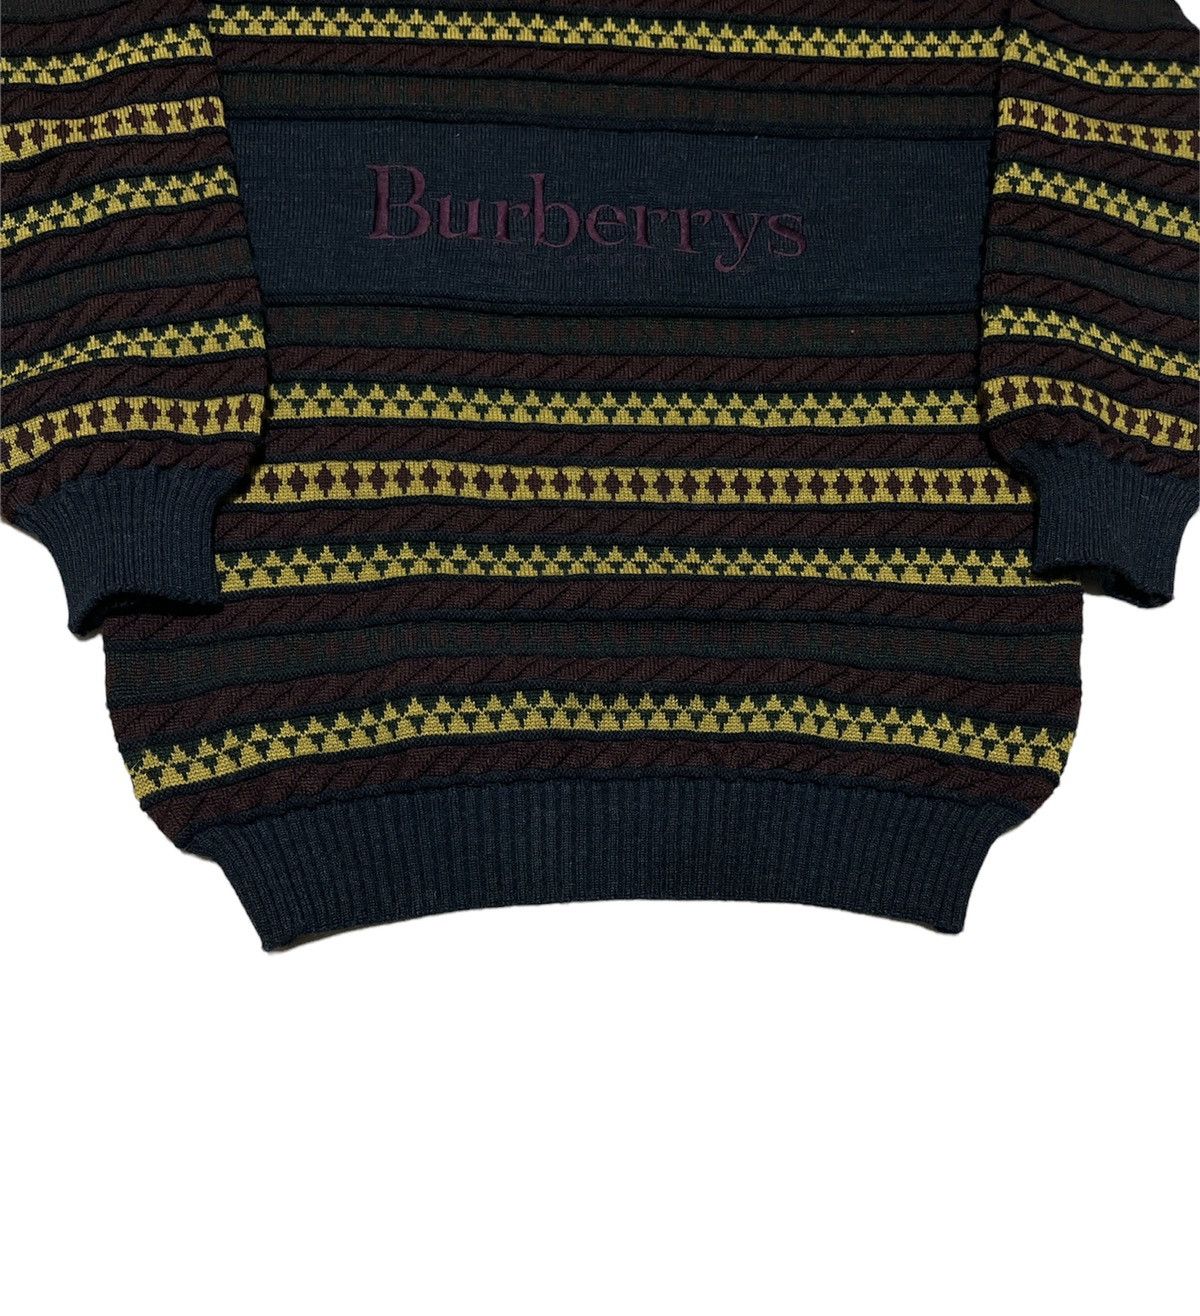 Vintage Burberrys embroidered knit sweater - 6